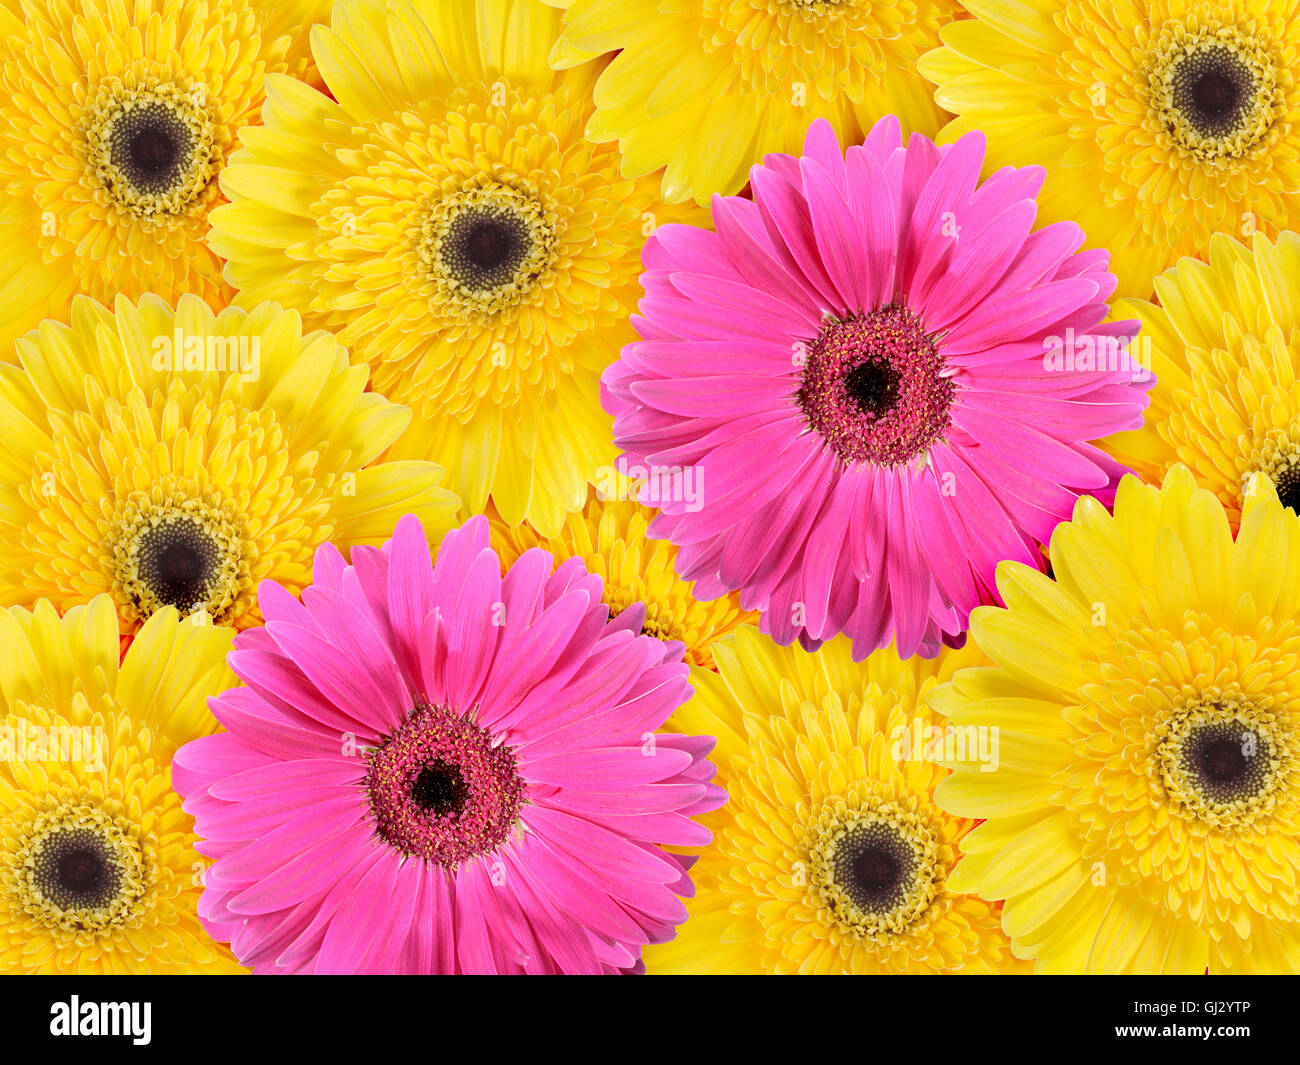 Abstract background of yellow and pink flowers Stock Photo